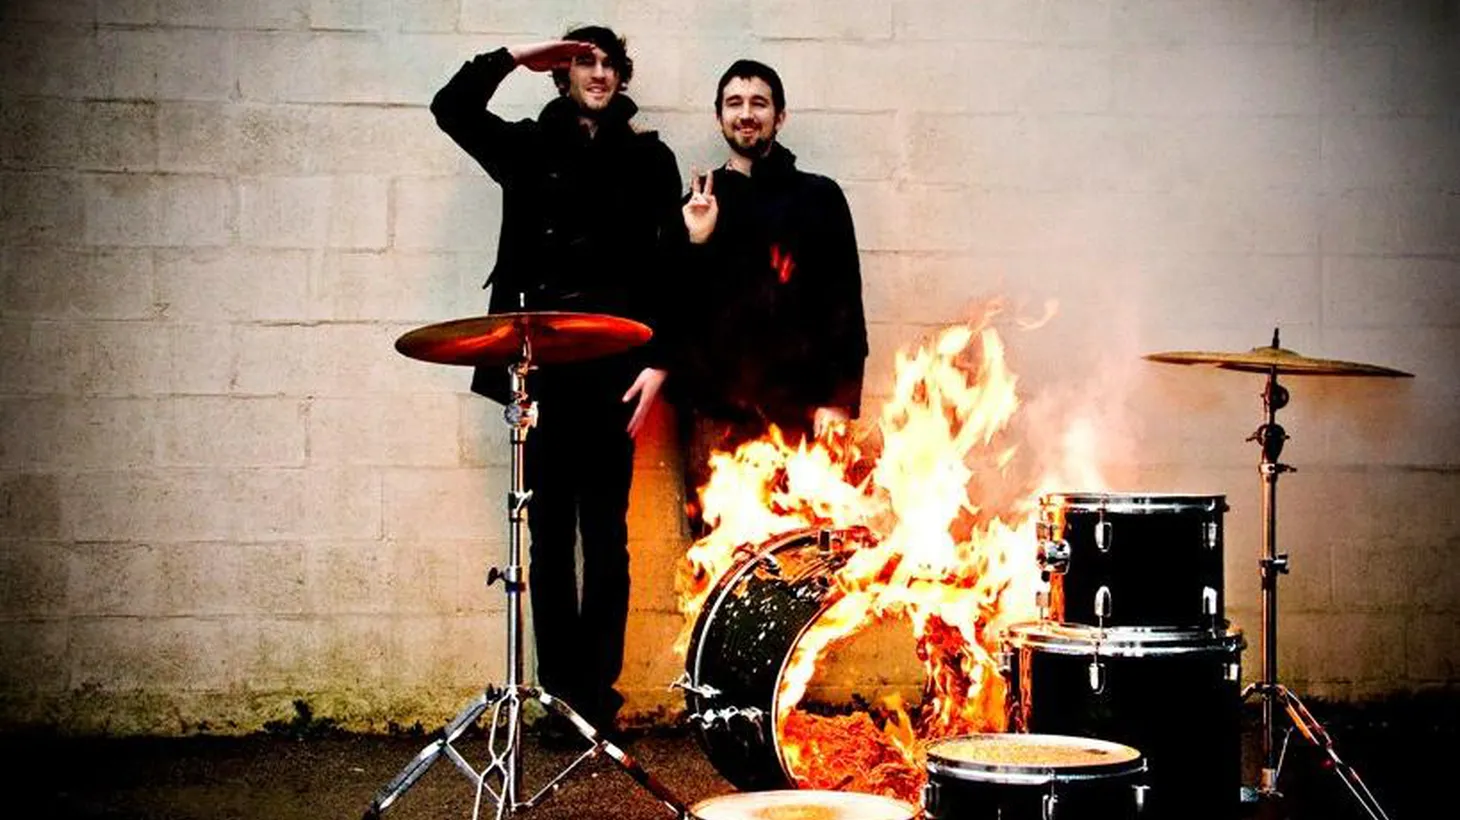 Vancouver's garage rock duo Japandroids received critical acclaim for their debut album and are preparing for a summer touring major music festivals around the world. Get a preview when they perform on Morning Becomes Eclectic at 11:15am.